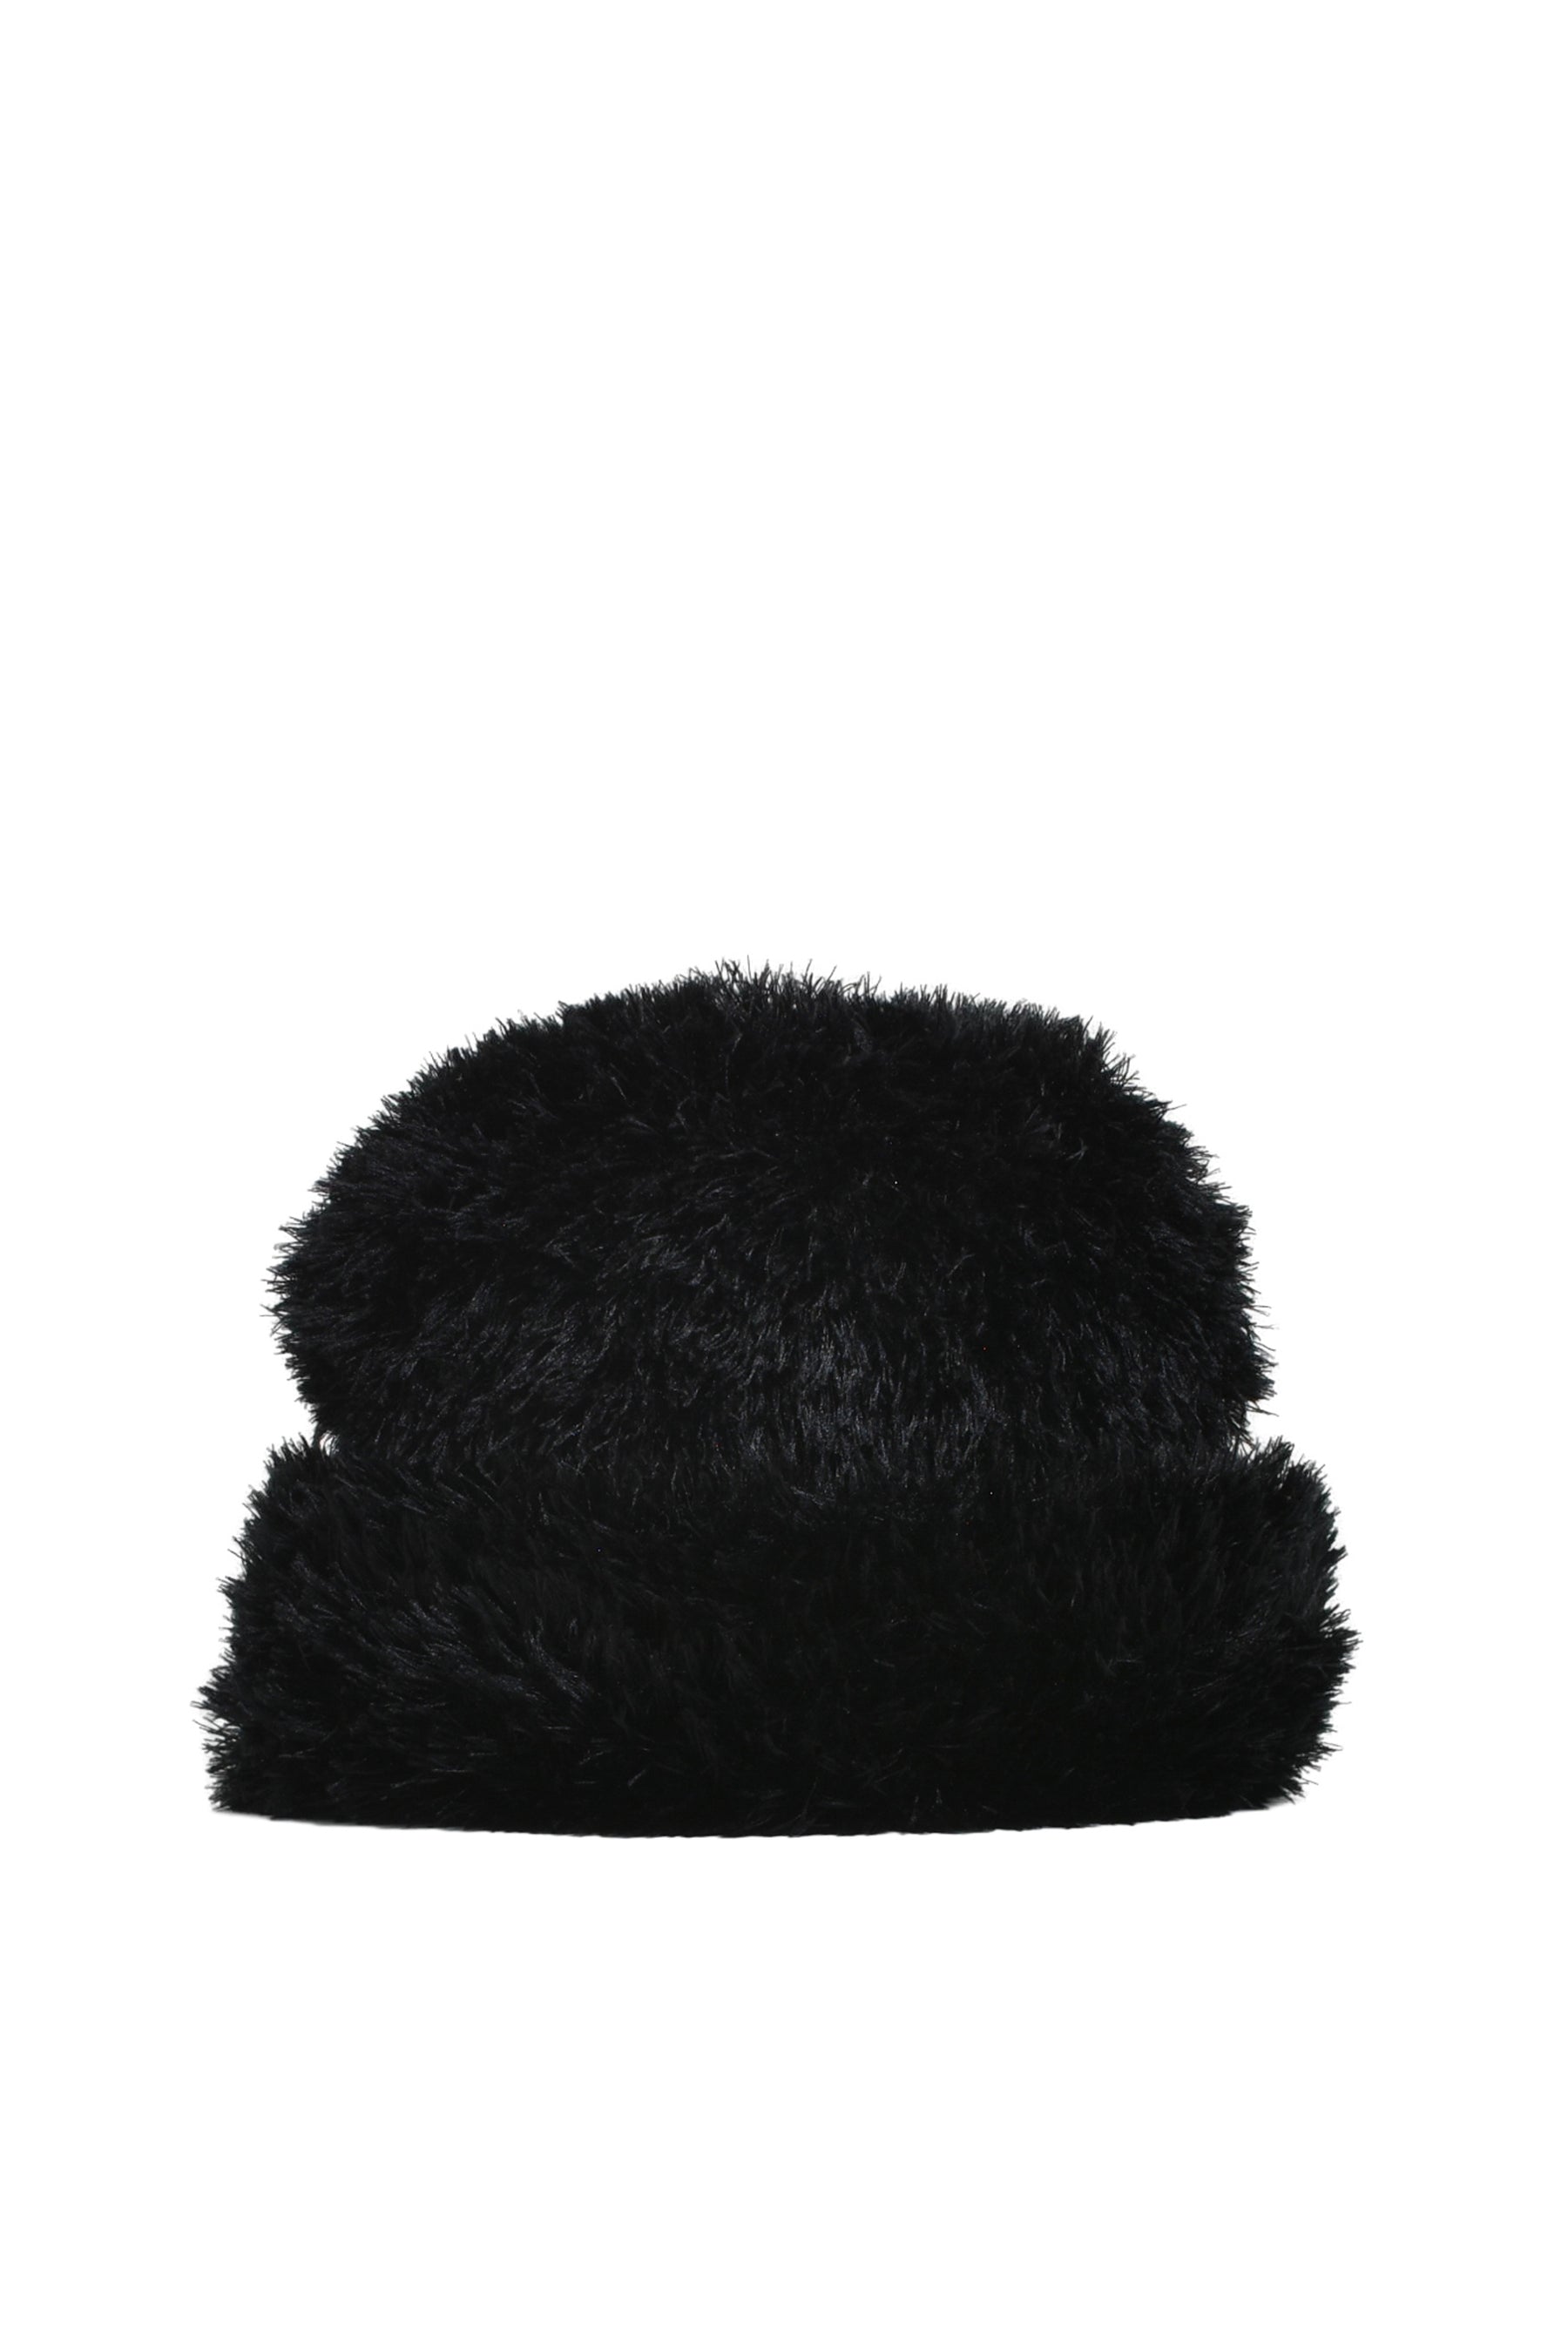 NICHOLAS DALEY ニコラス デイリー FW23 HAND KNITTED FUZZY HAT / BLK